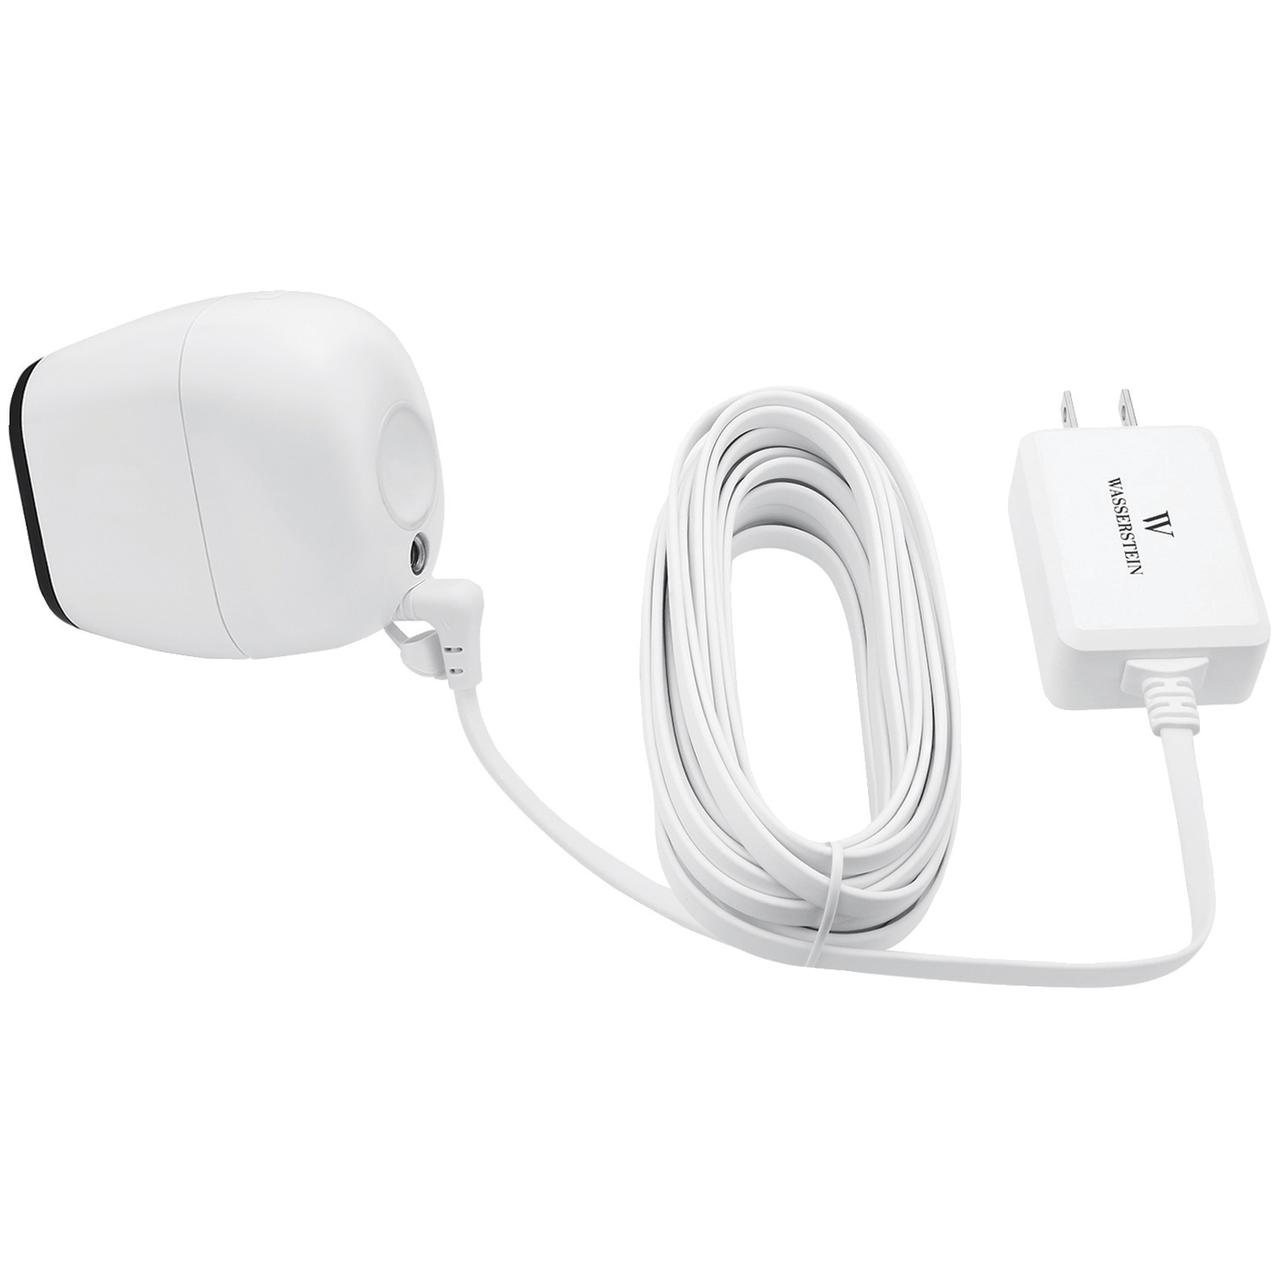 White Wasserstein Weatherproof 6ft//1.8m Cable Compatible with Arlo Pro /& Arlo Pro 2